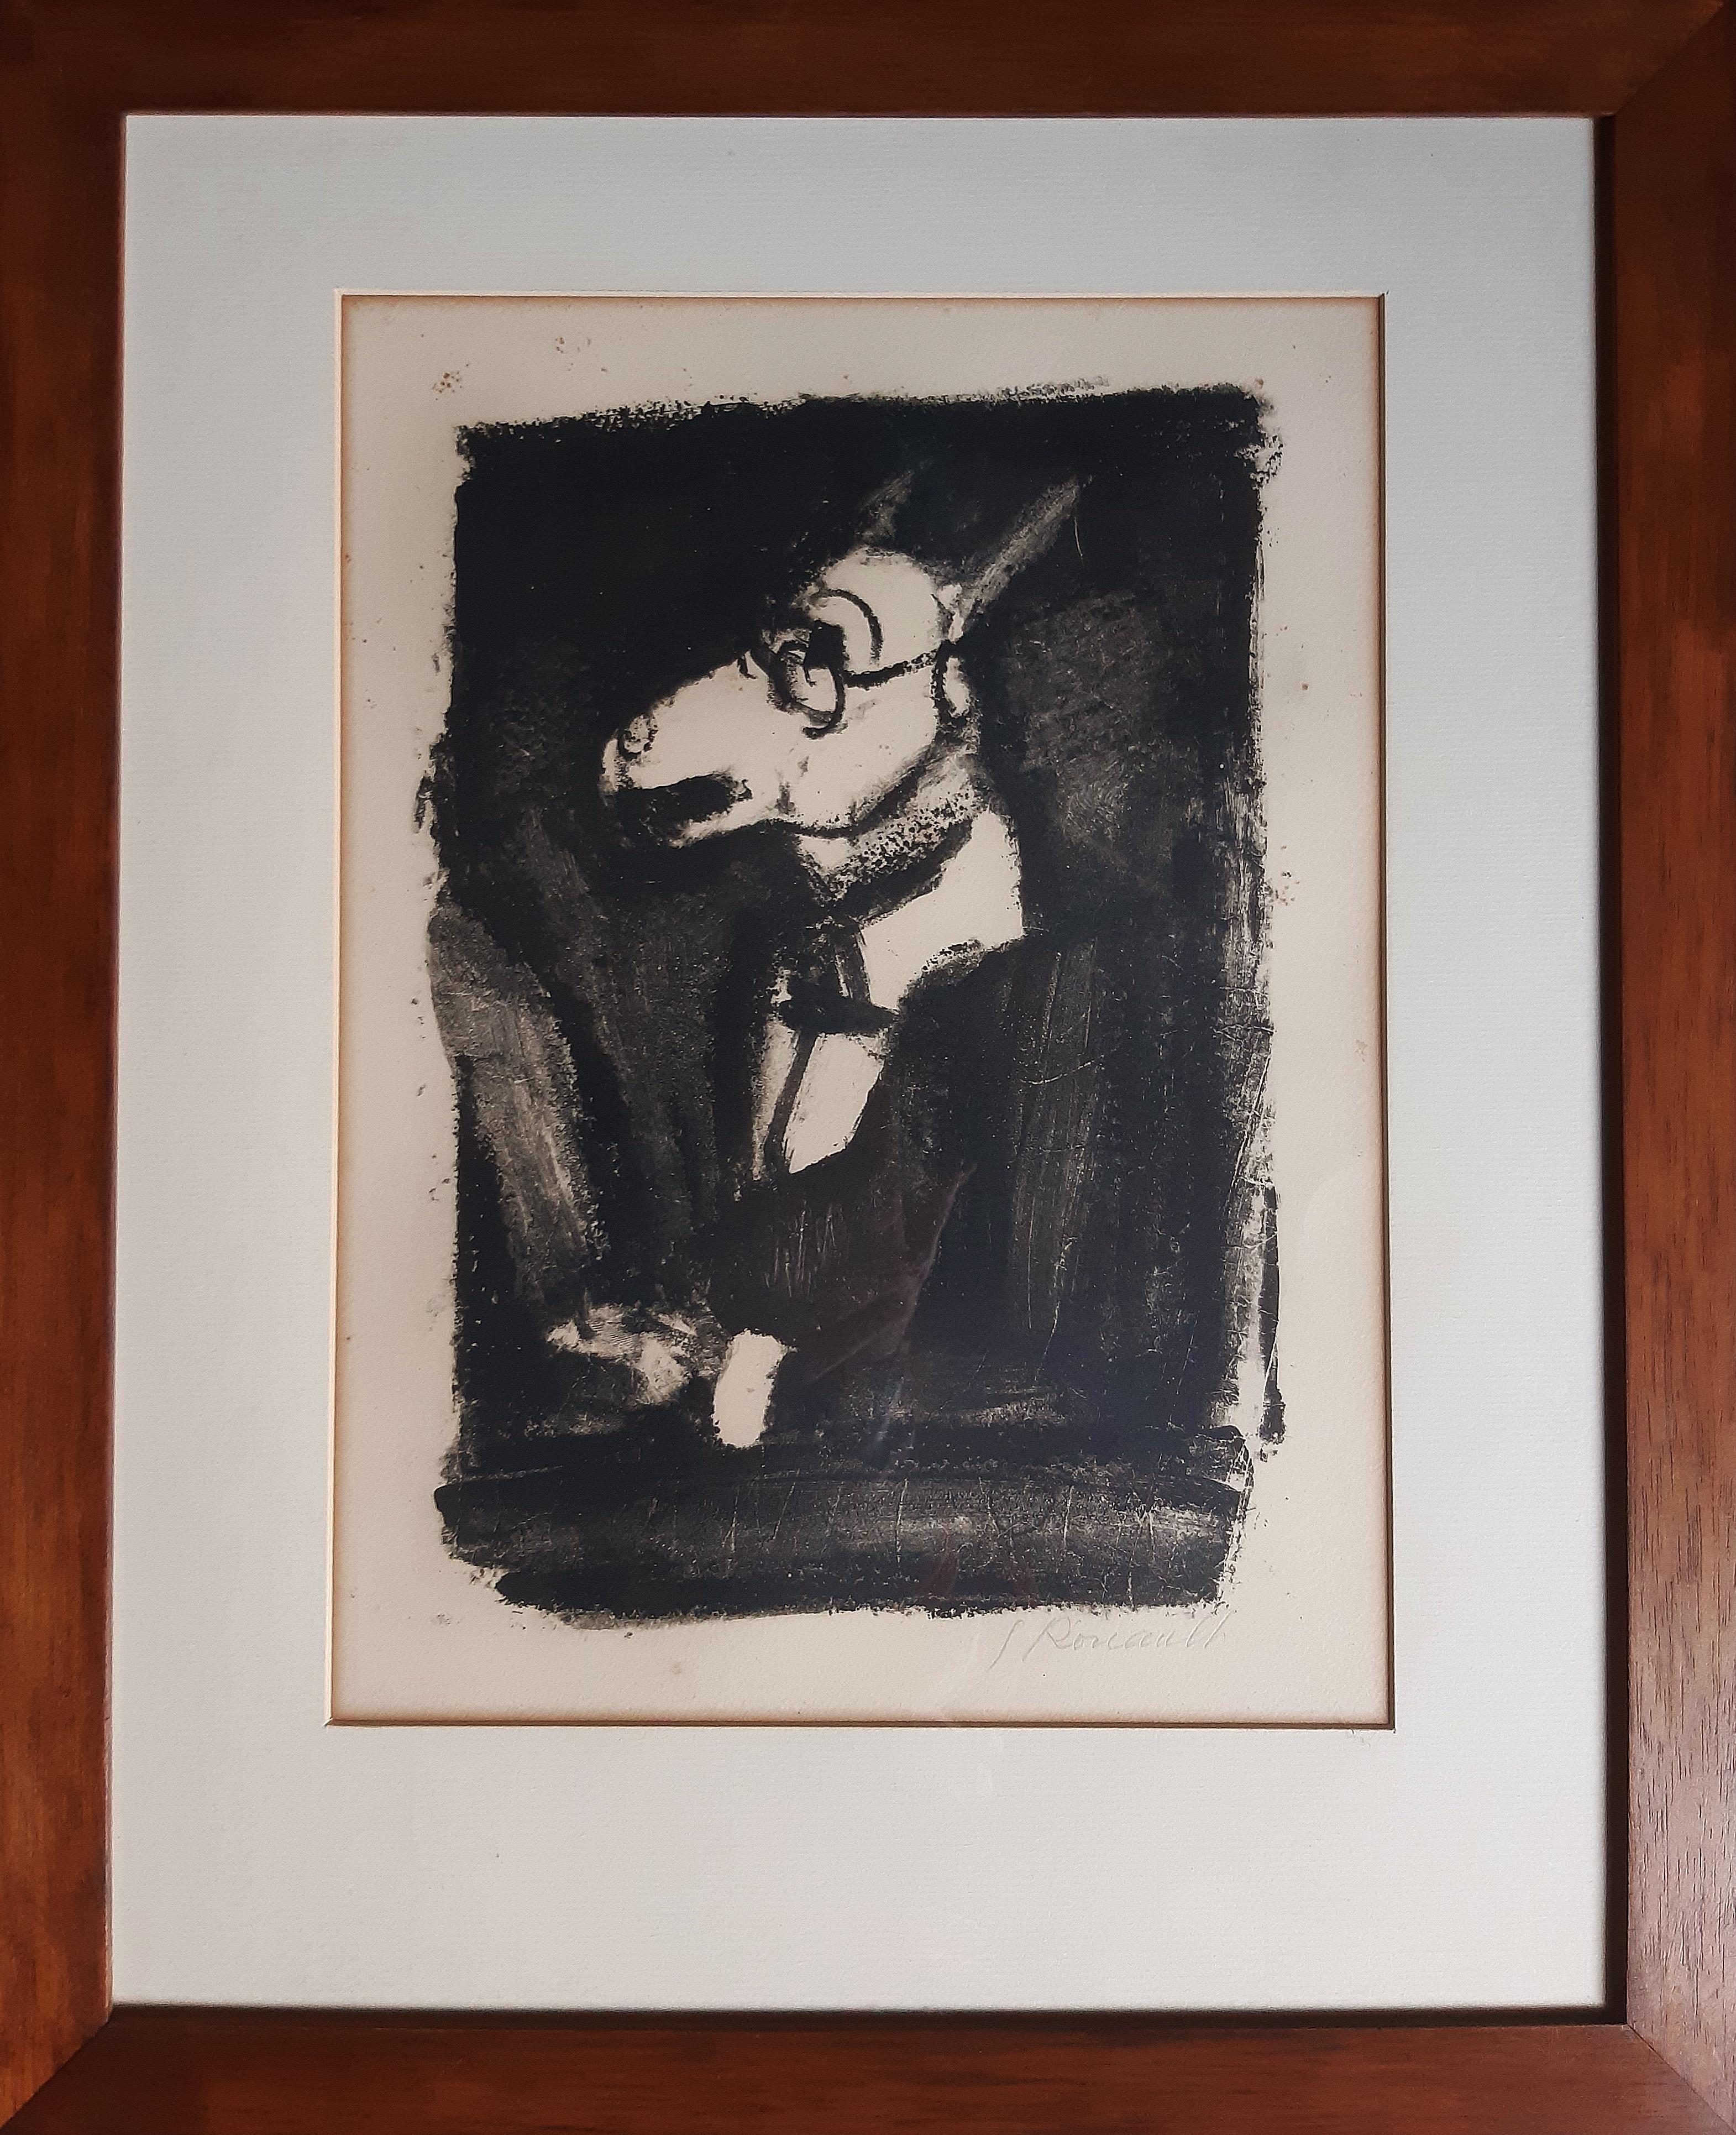 L’Ane - Original Etching and Aquatint by G. Rouault - 1927 - Print by Georges Rouault